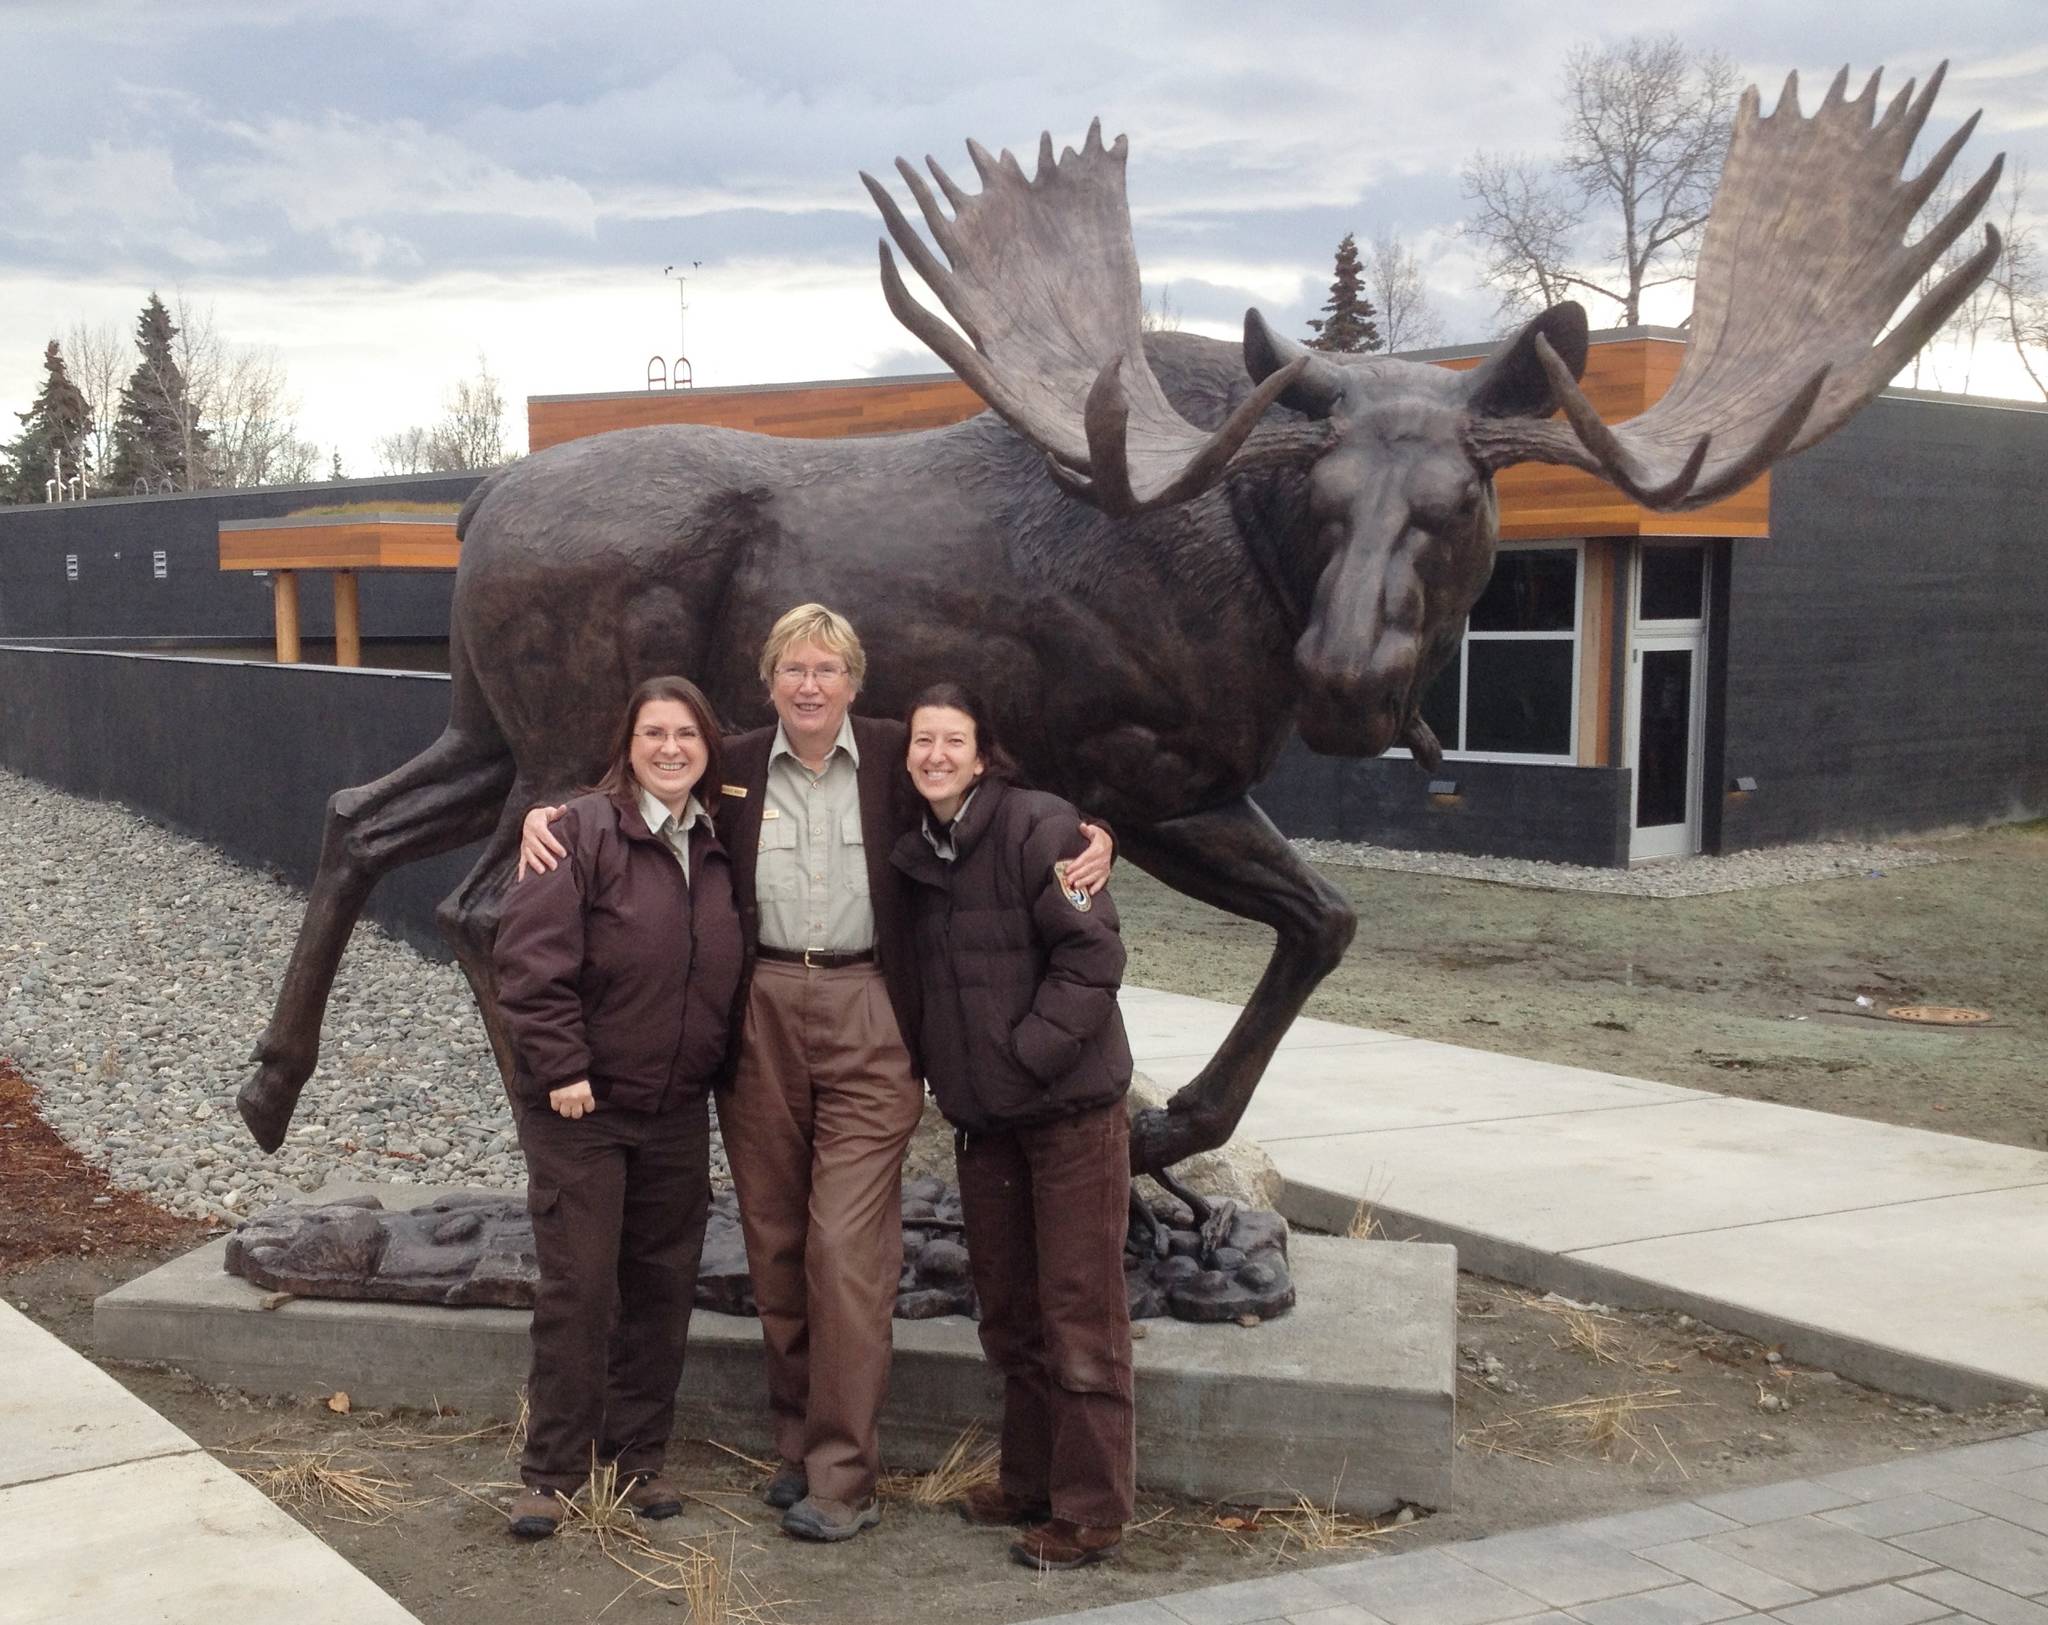 Retiring Park Ranger Candace Ward (center) with her dynamic colleagues, Leah Eskelin (left) and Michelle Ostrowski (right) in front of Majesty the Moose (back). (Photo courtesy Kenai National Wildlife Refuge)